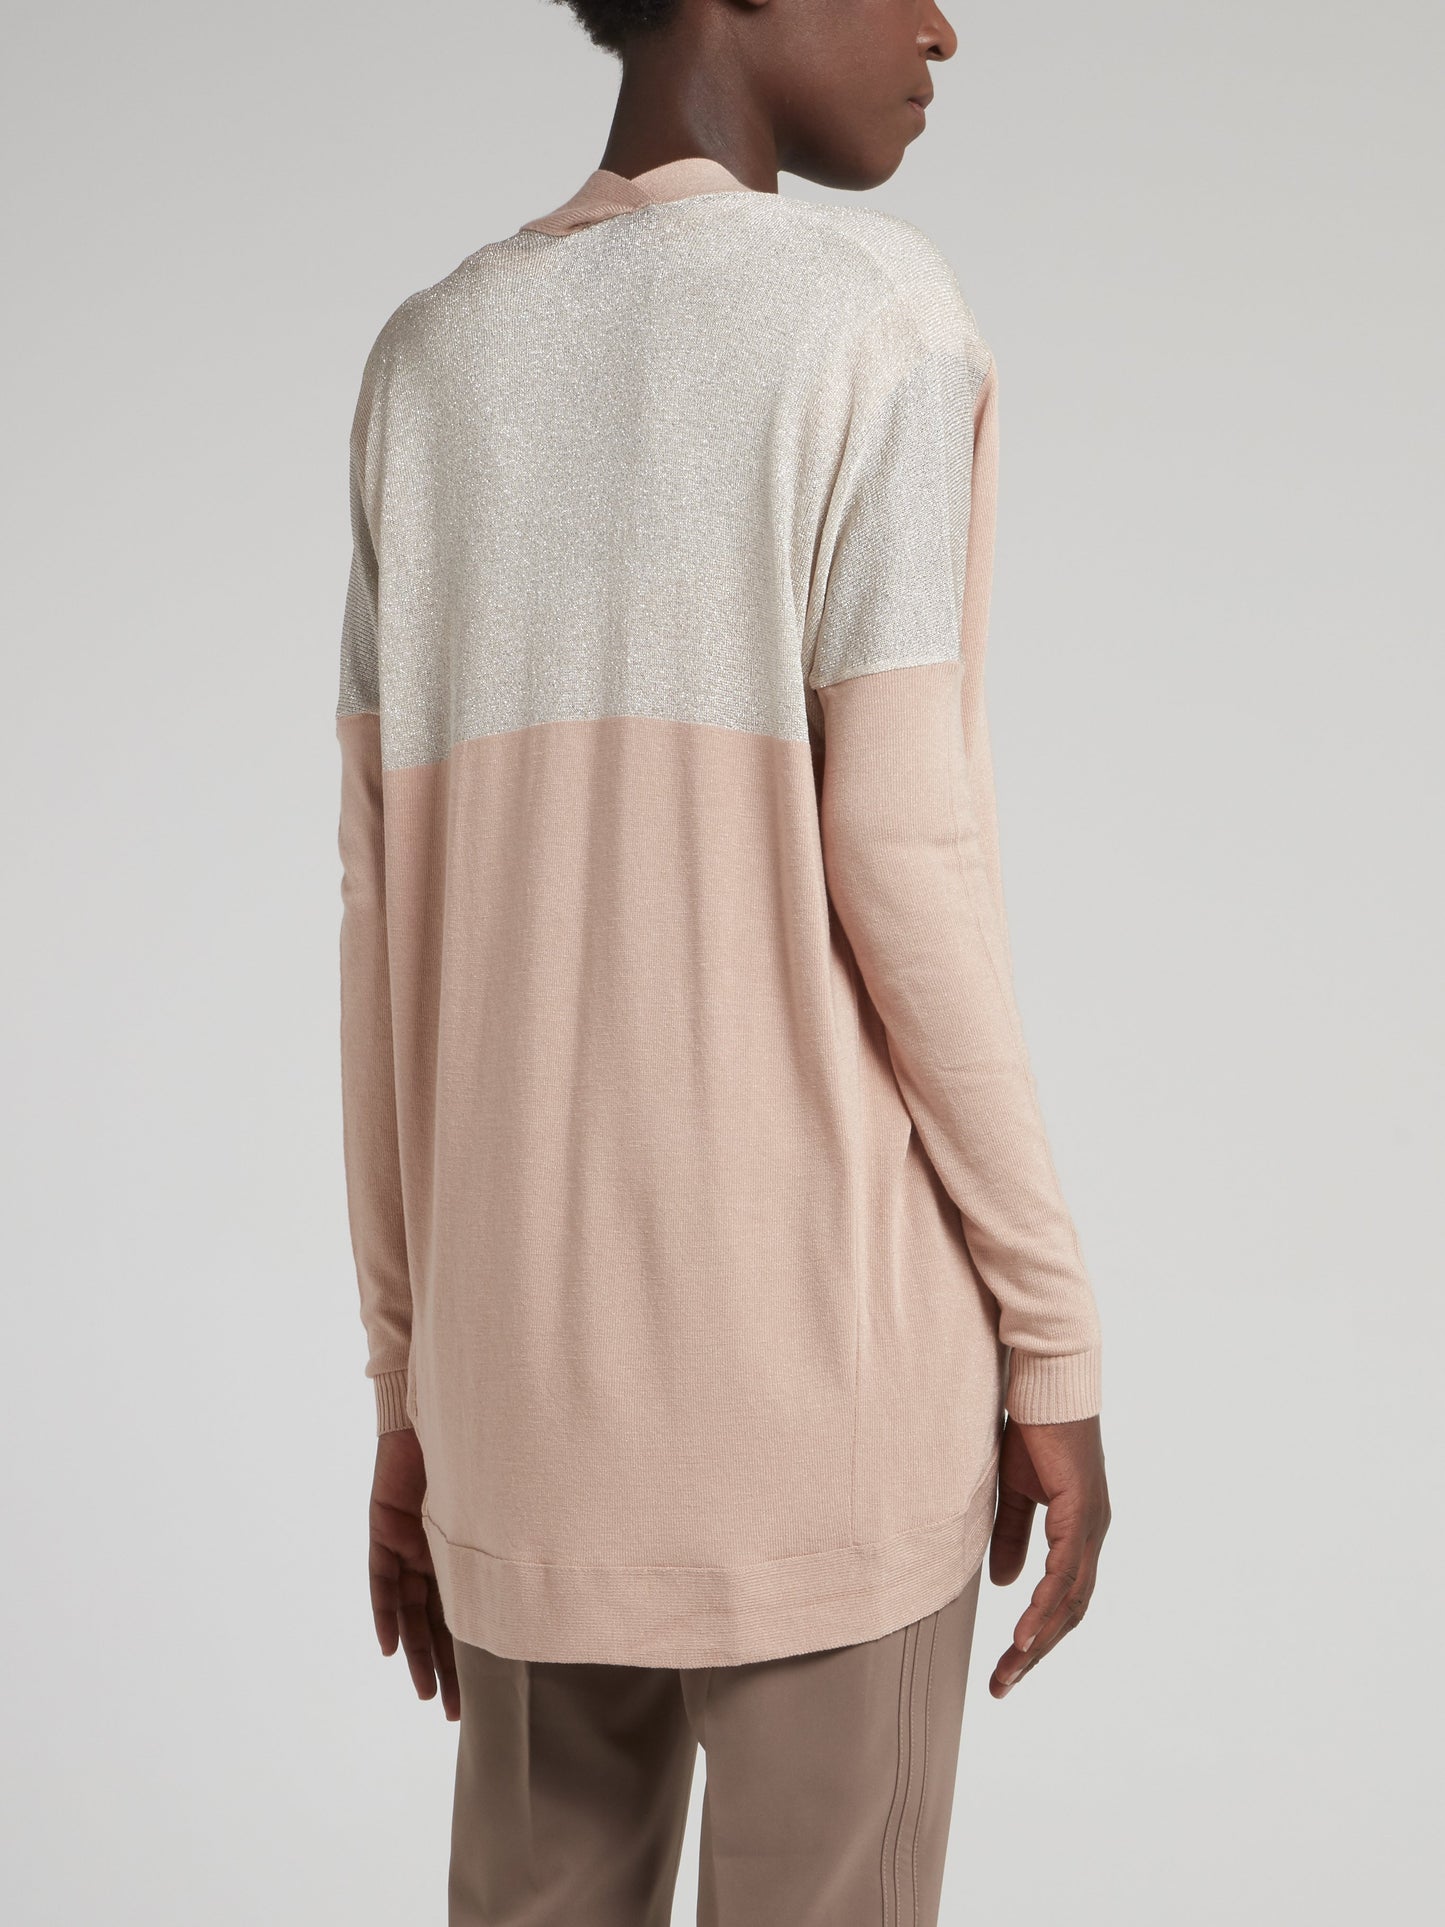 Beige Knitted Silver Panel Top